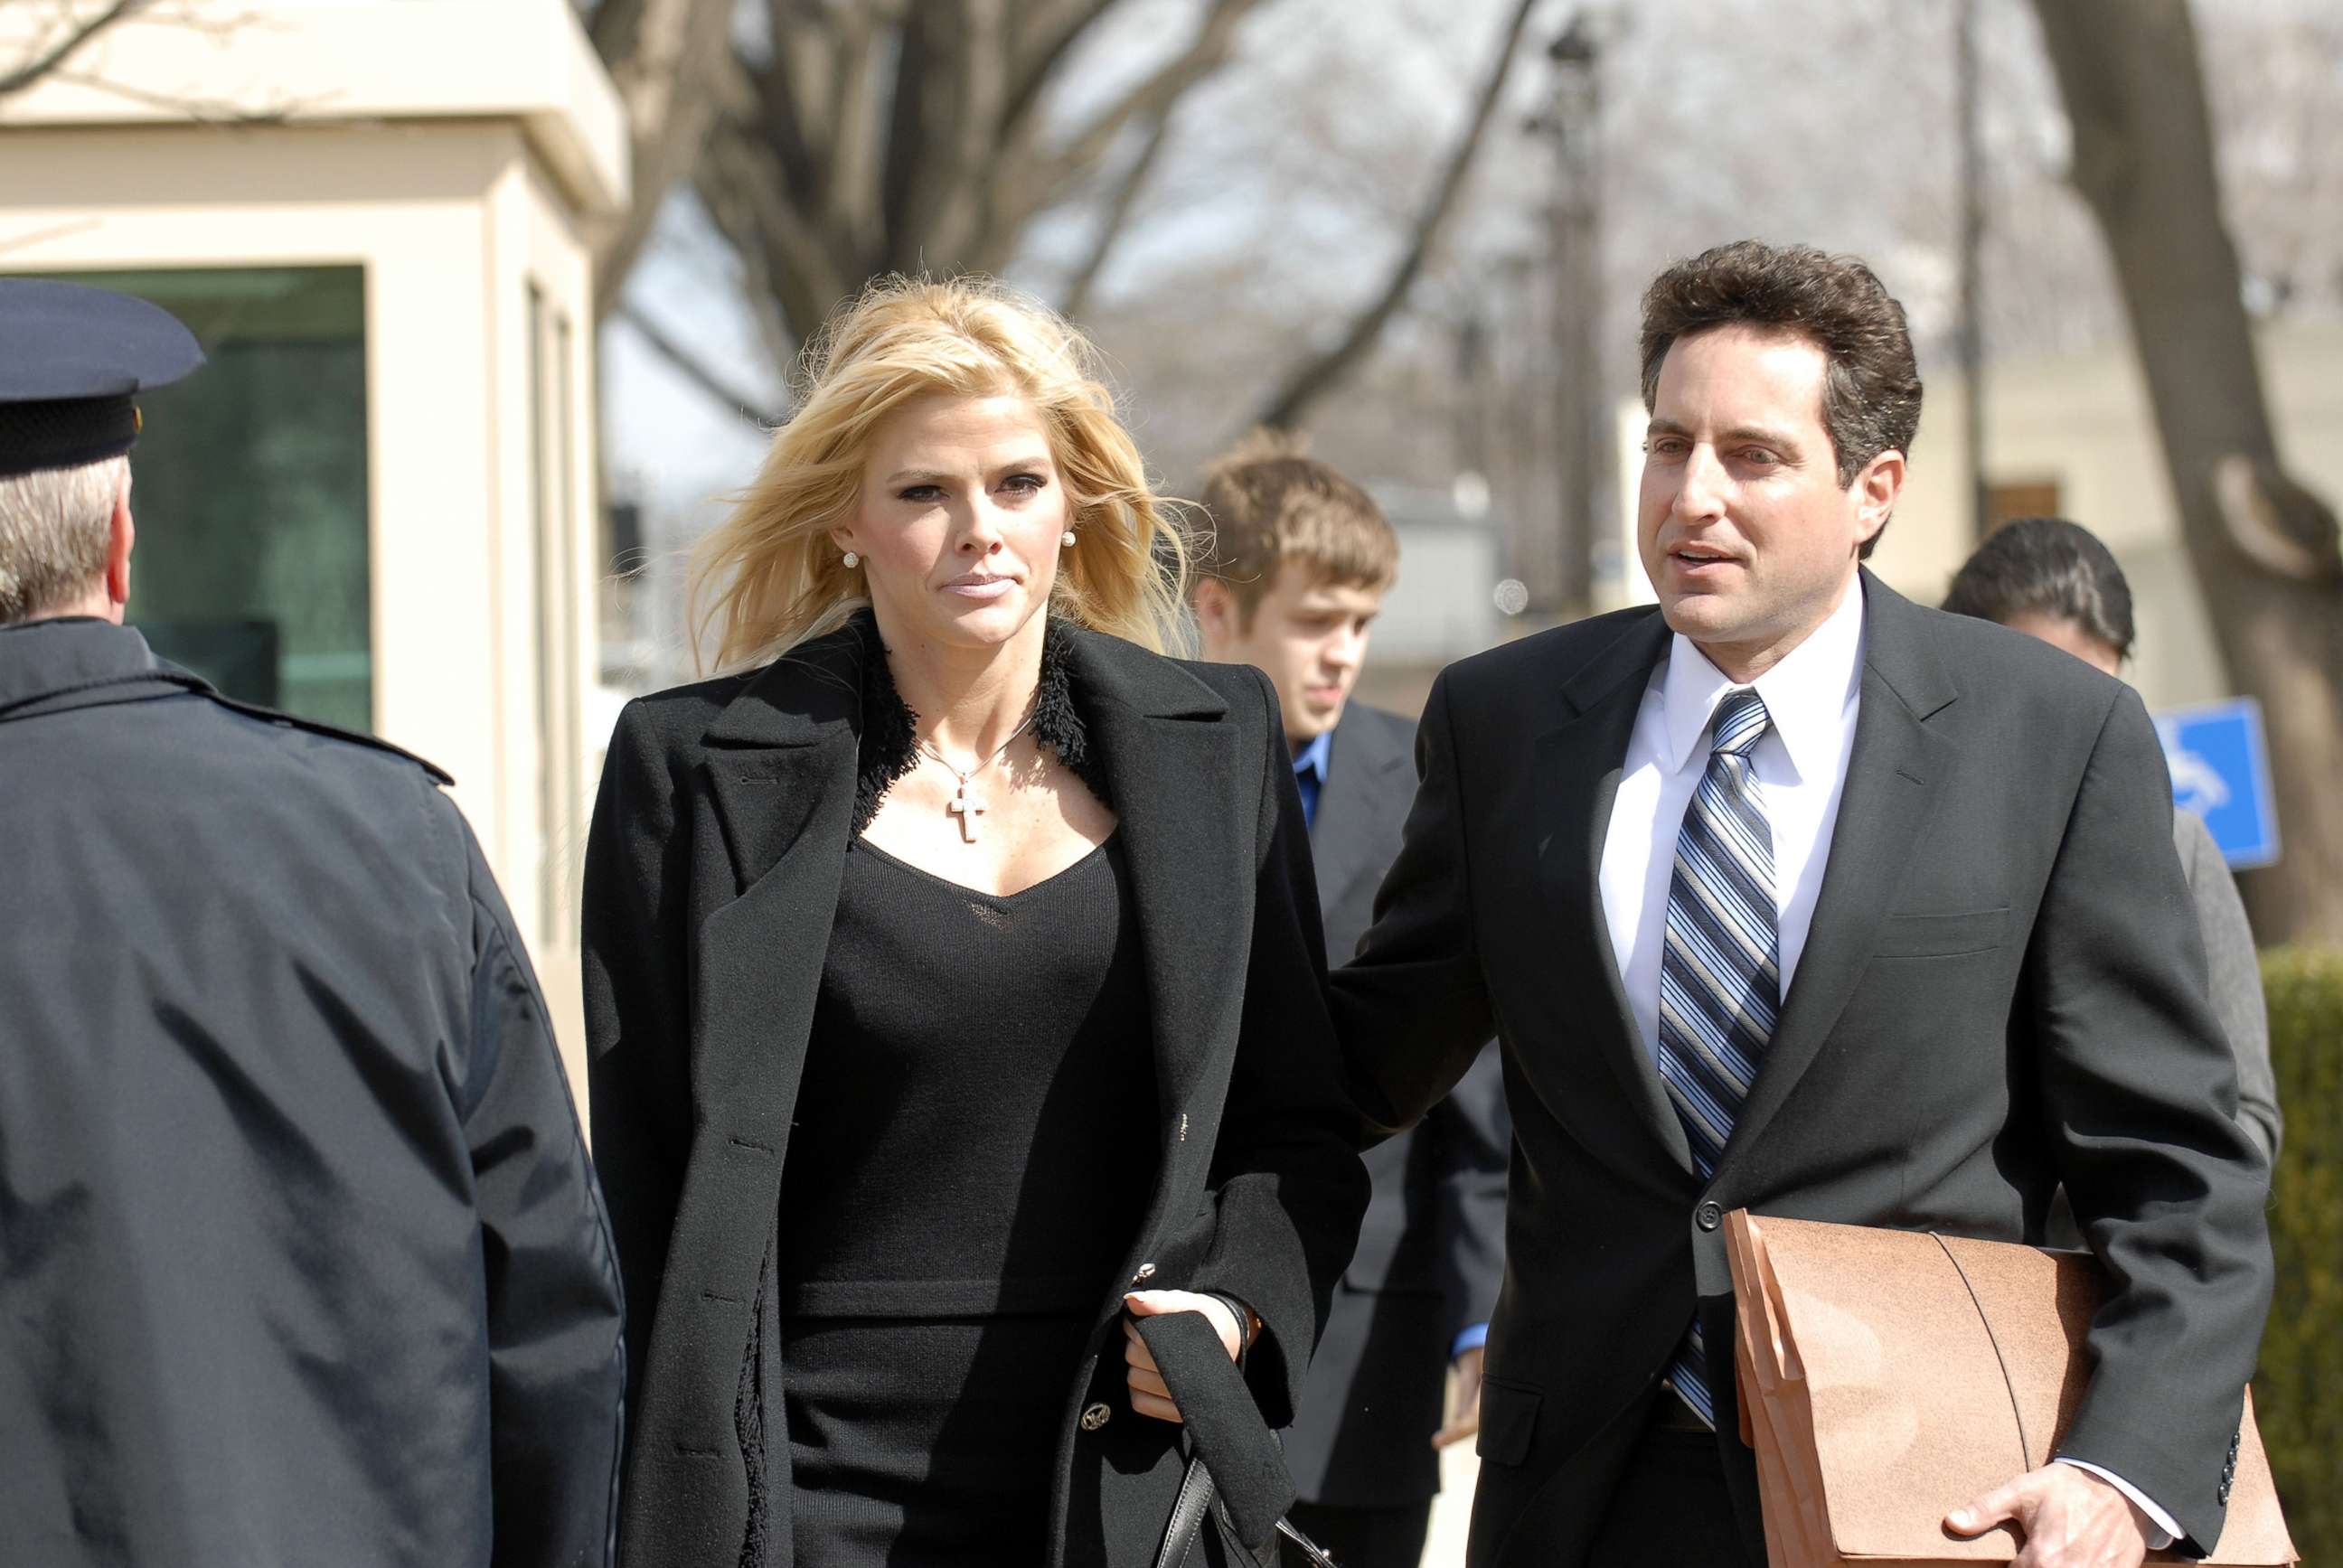 PHOTO: Former Playboy Playmate Anna Nicole Smith and her attorney Howard Stern leave the Supreme Court in Washington, D.C., Feb. 28, 2006.